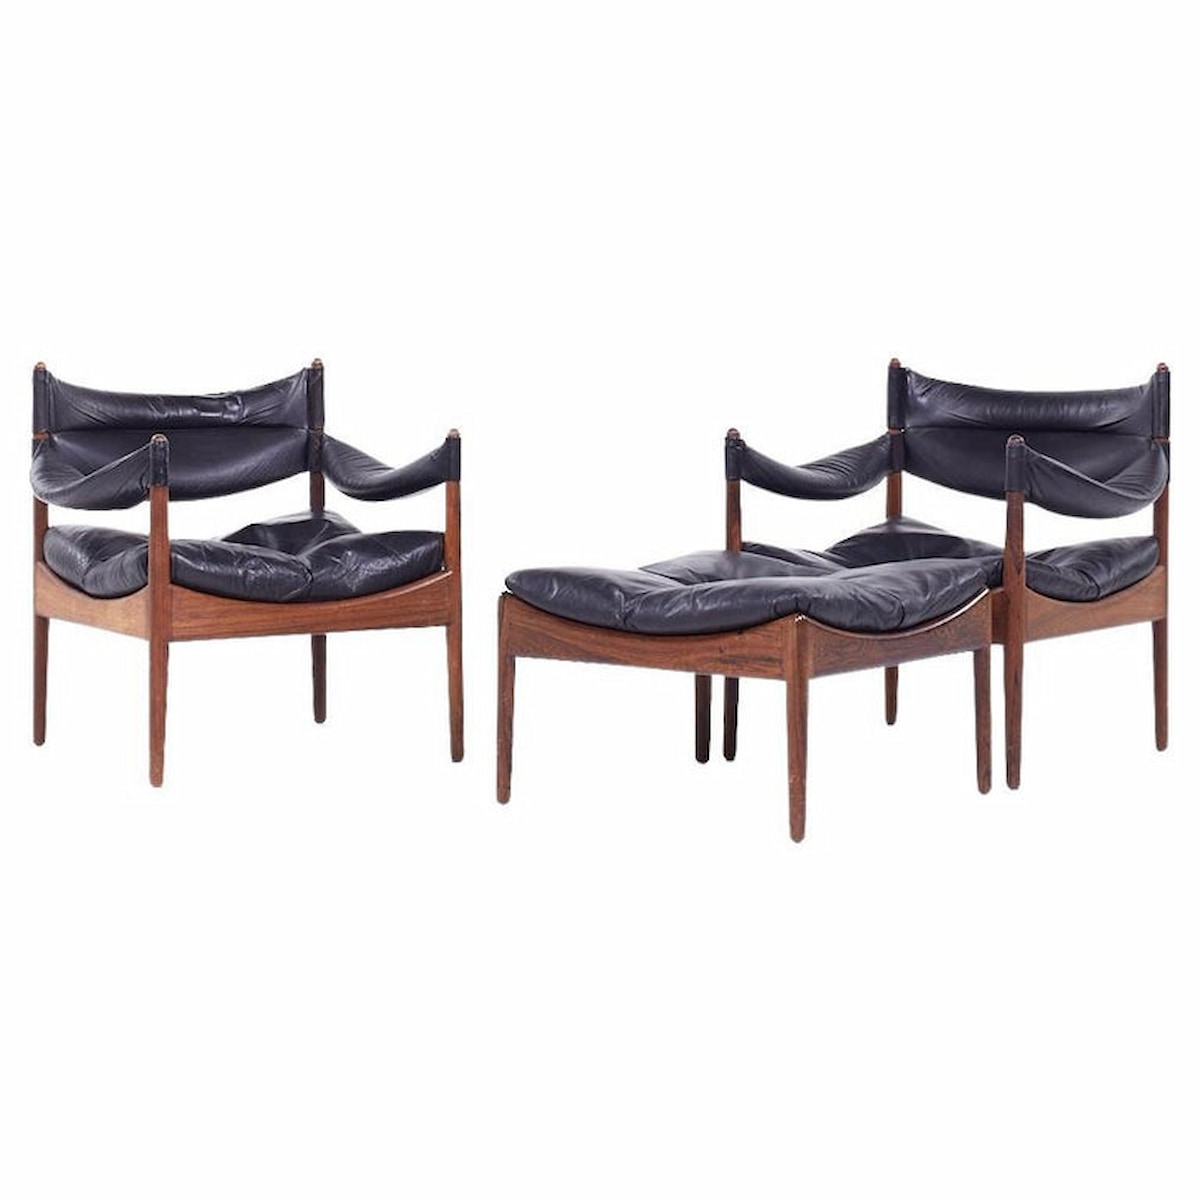 Kristian Vedel for Willadsen Møbelfabrik Modus Mid Century Danish Rosewood and Leather Lounge Chairs with Ottoman